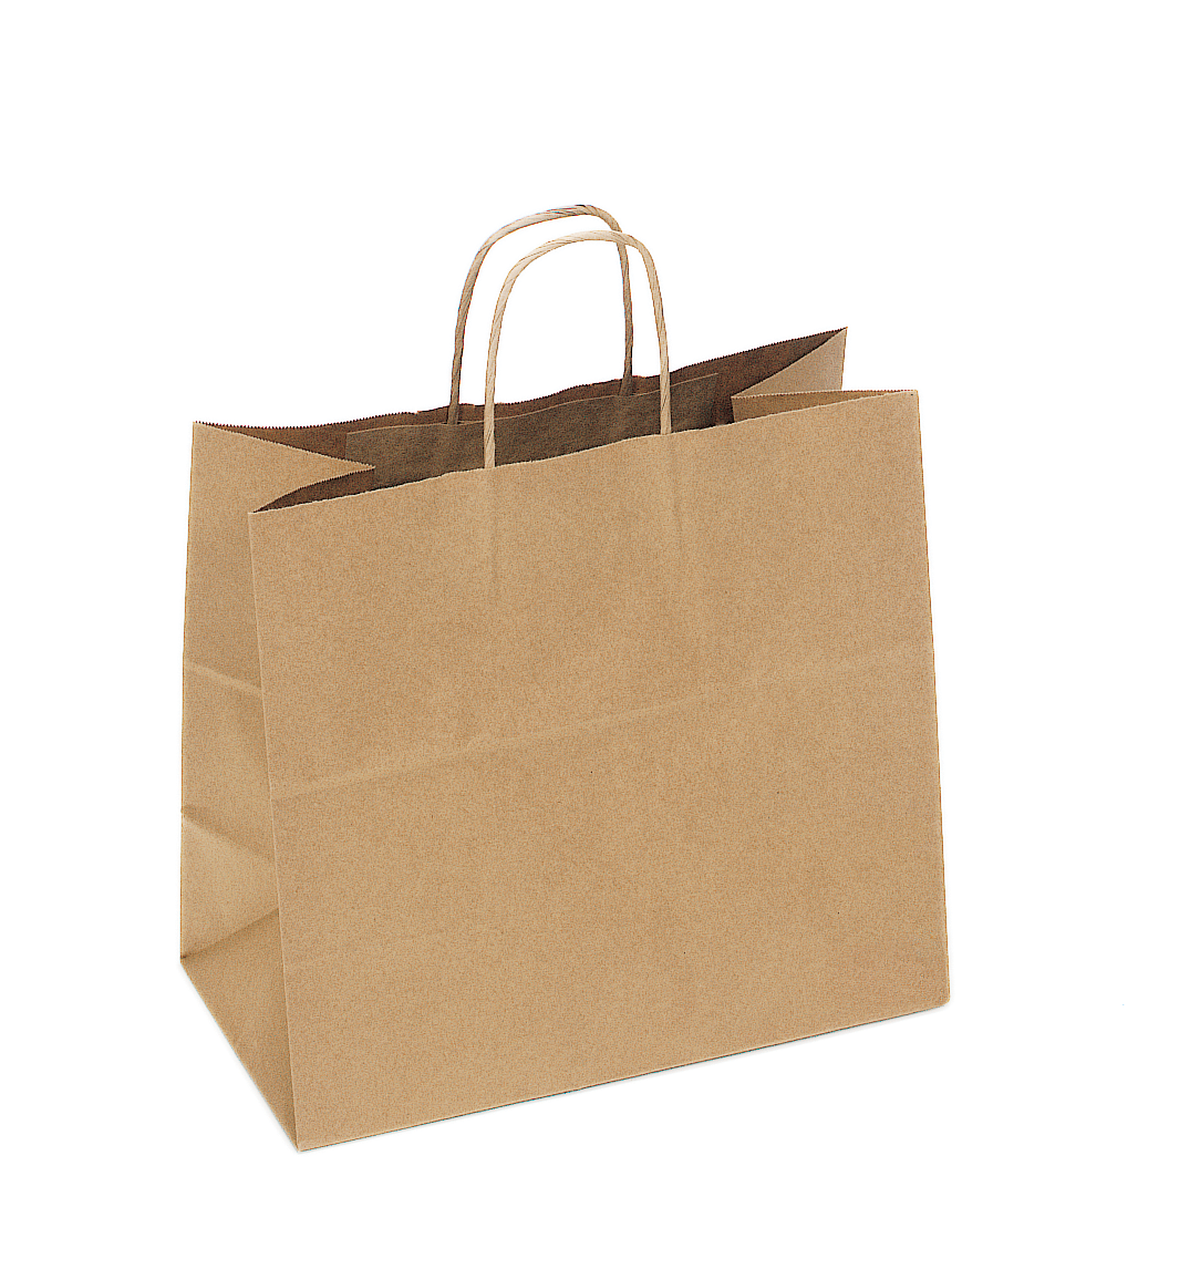 Buy Kraft Paper Bags [Brown] Online Manufacturers and Suppliers